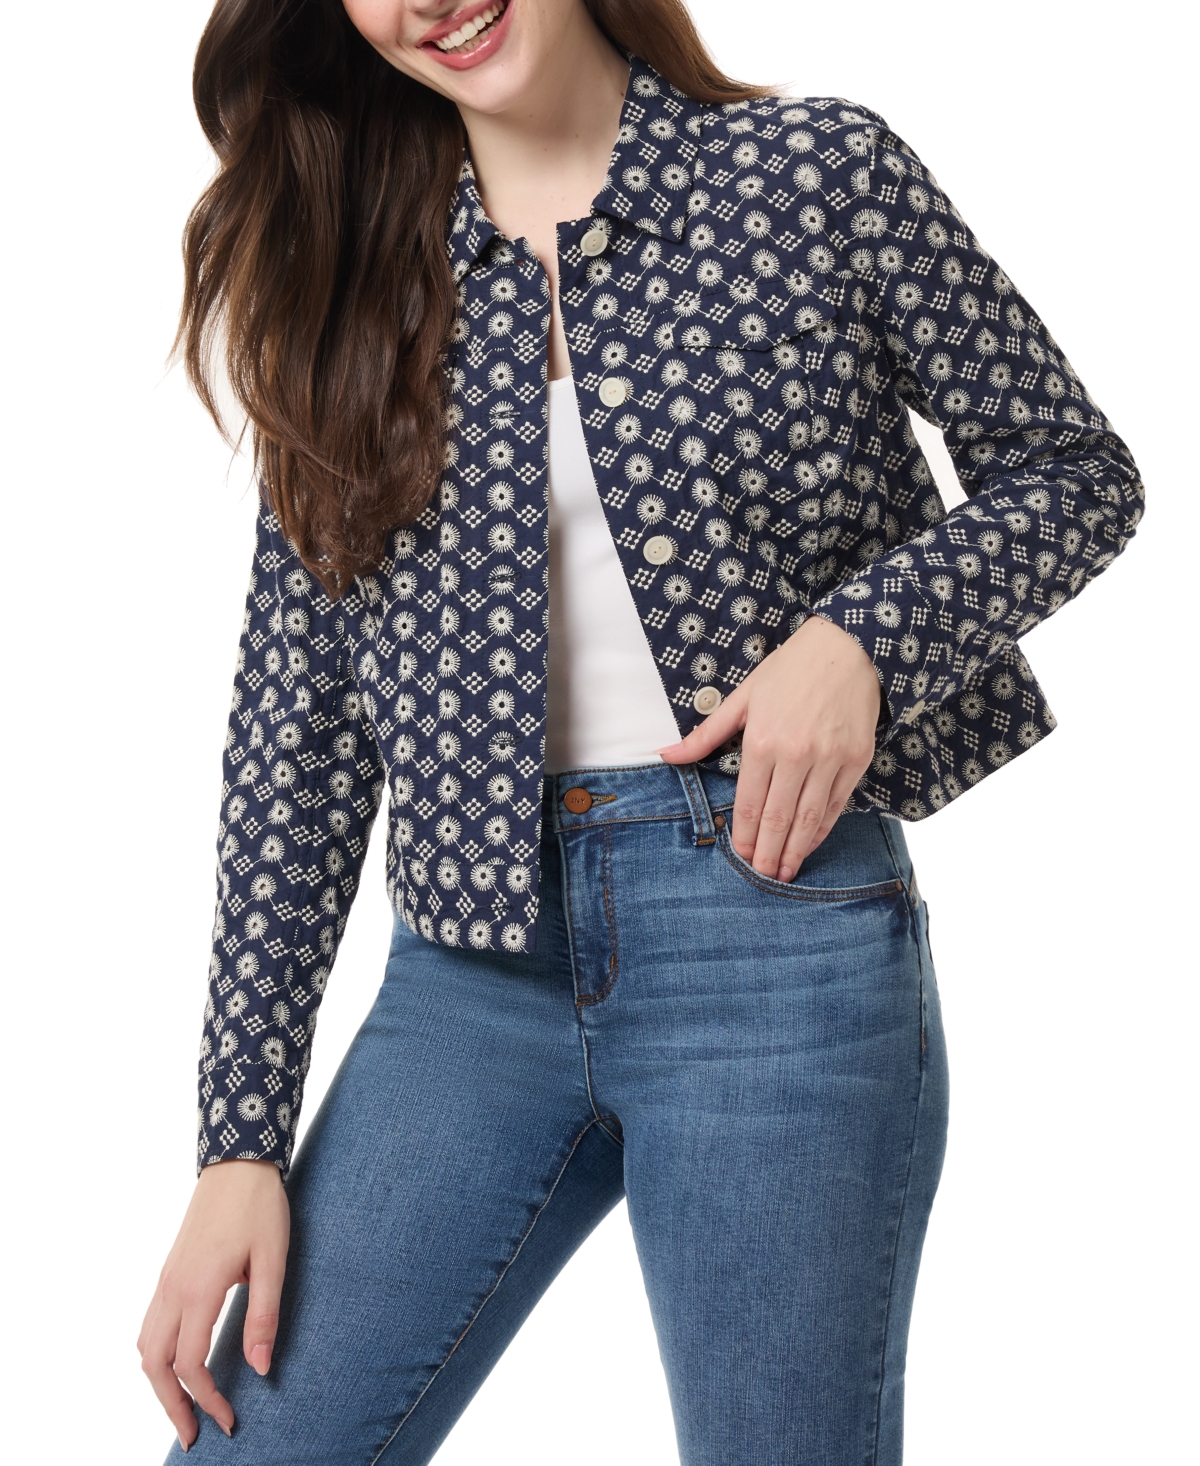 Women's Cotton Eyelet-Embroidered Jacket - Pacific Navy